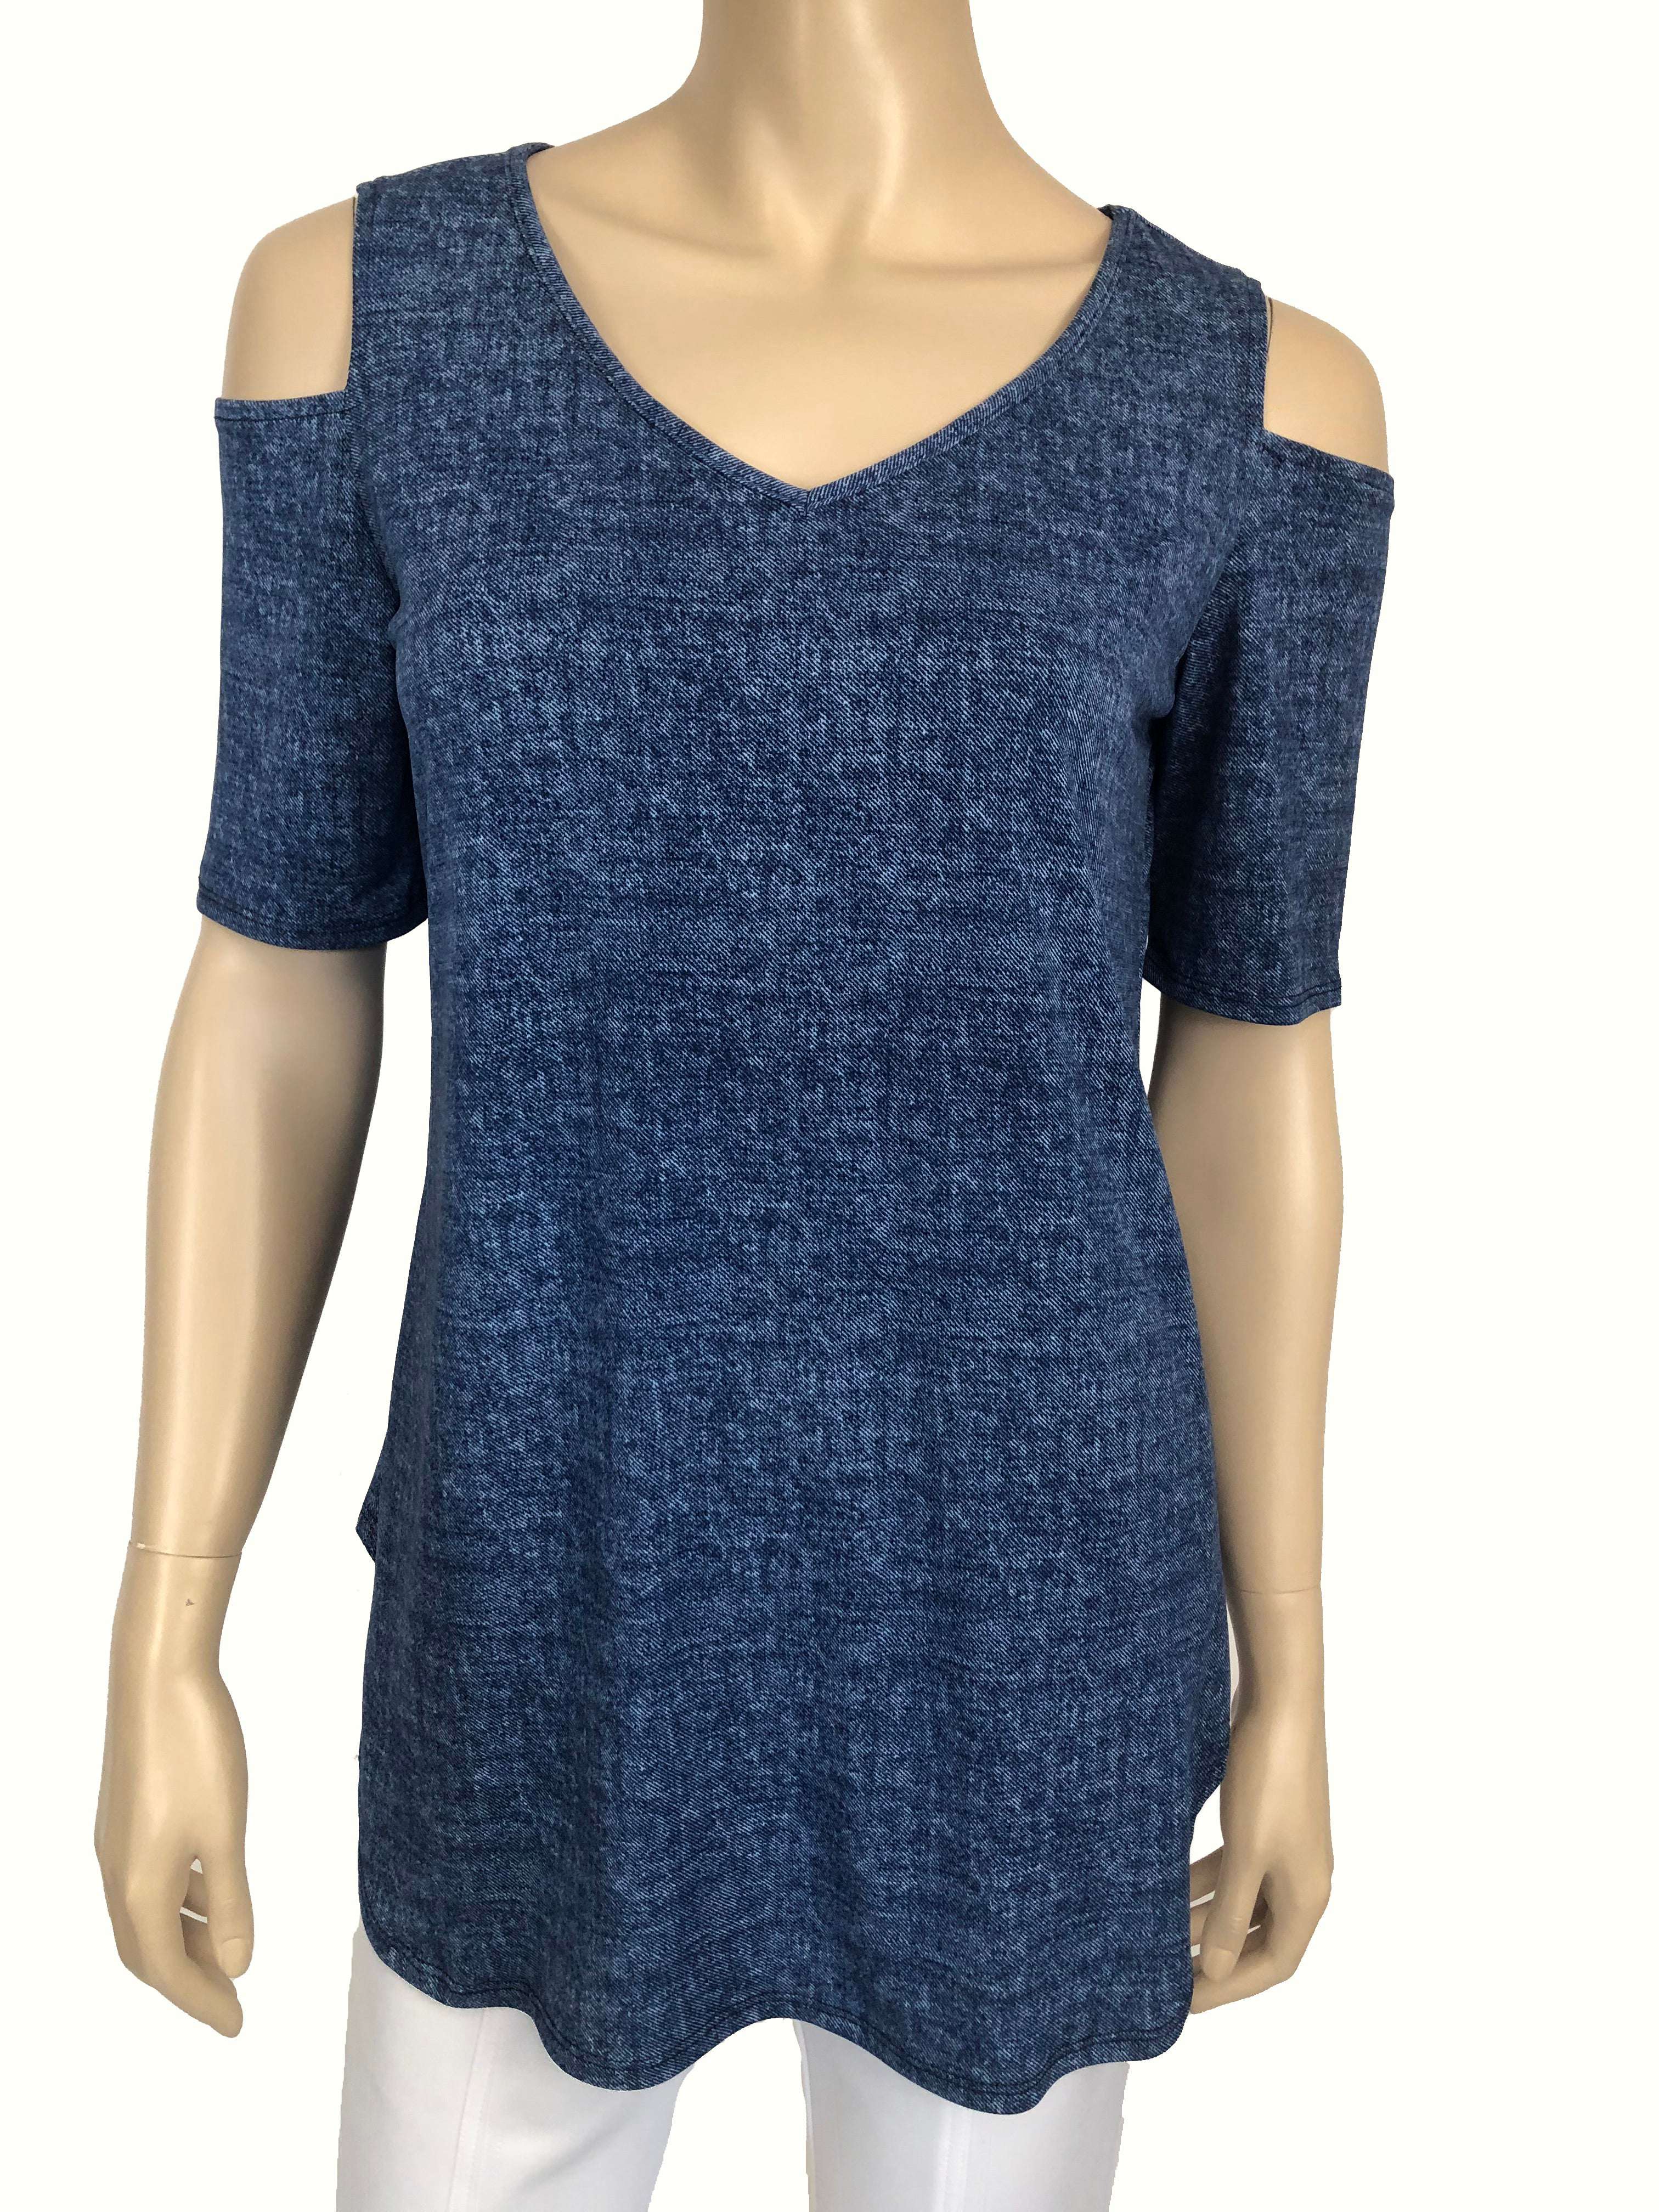 Women's Tops Denim Cold Shoulder Our Best Seller and Quality Comfort Fit Made in Canada - Yvonne Marie - Yvonne Marie